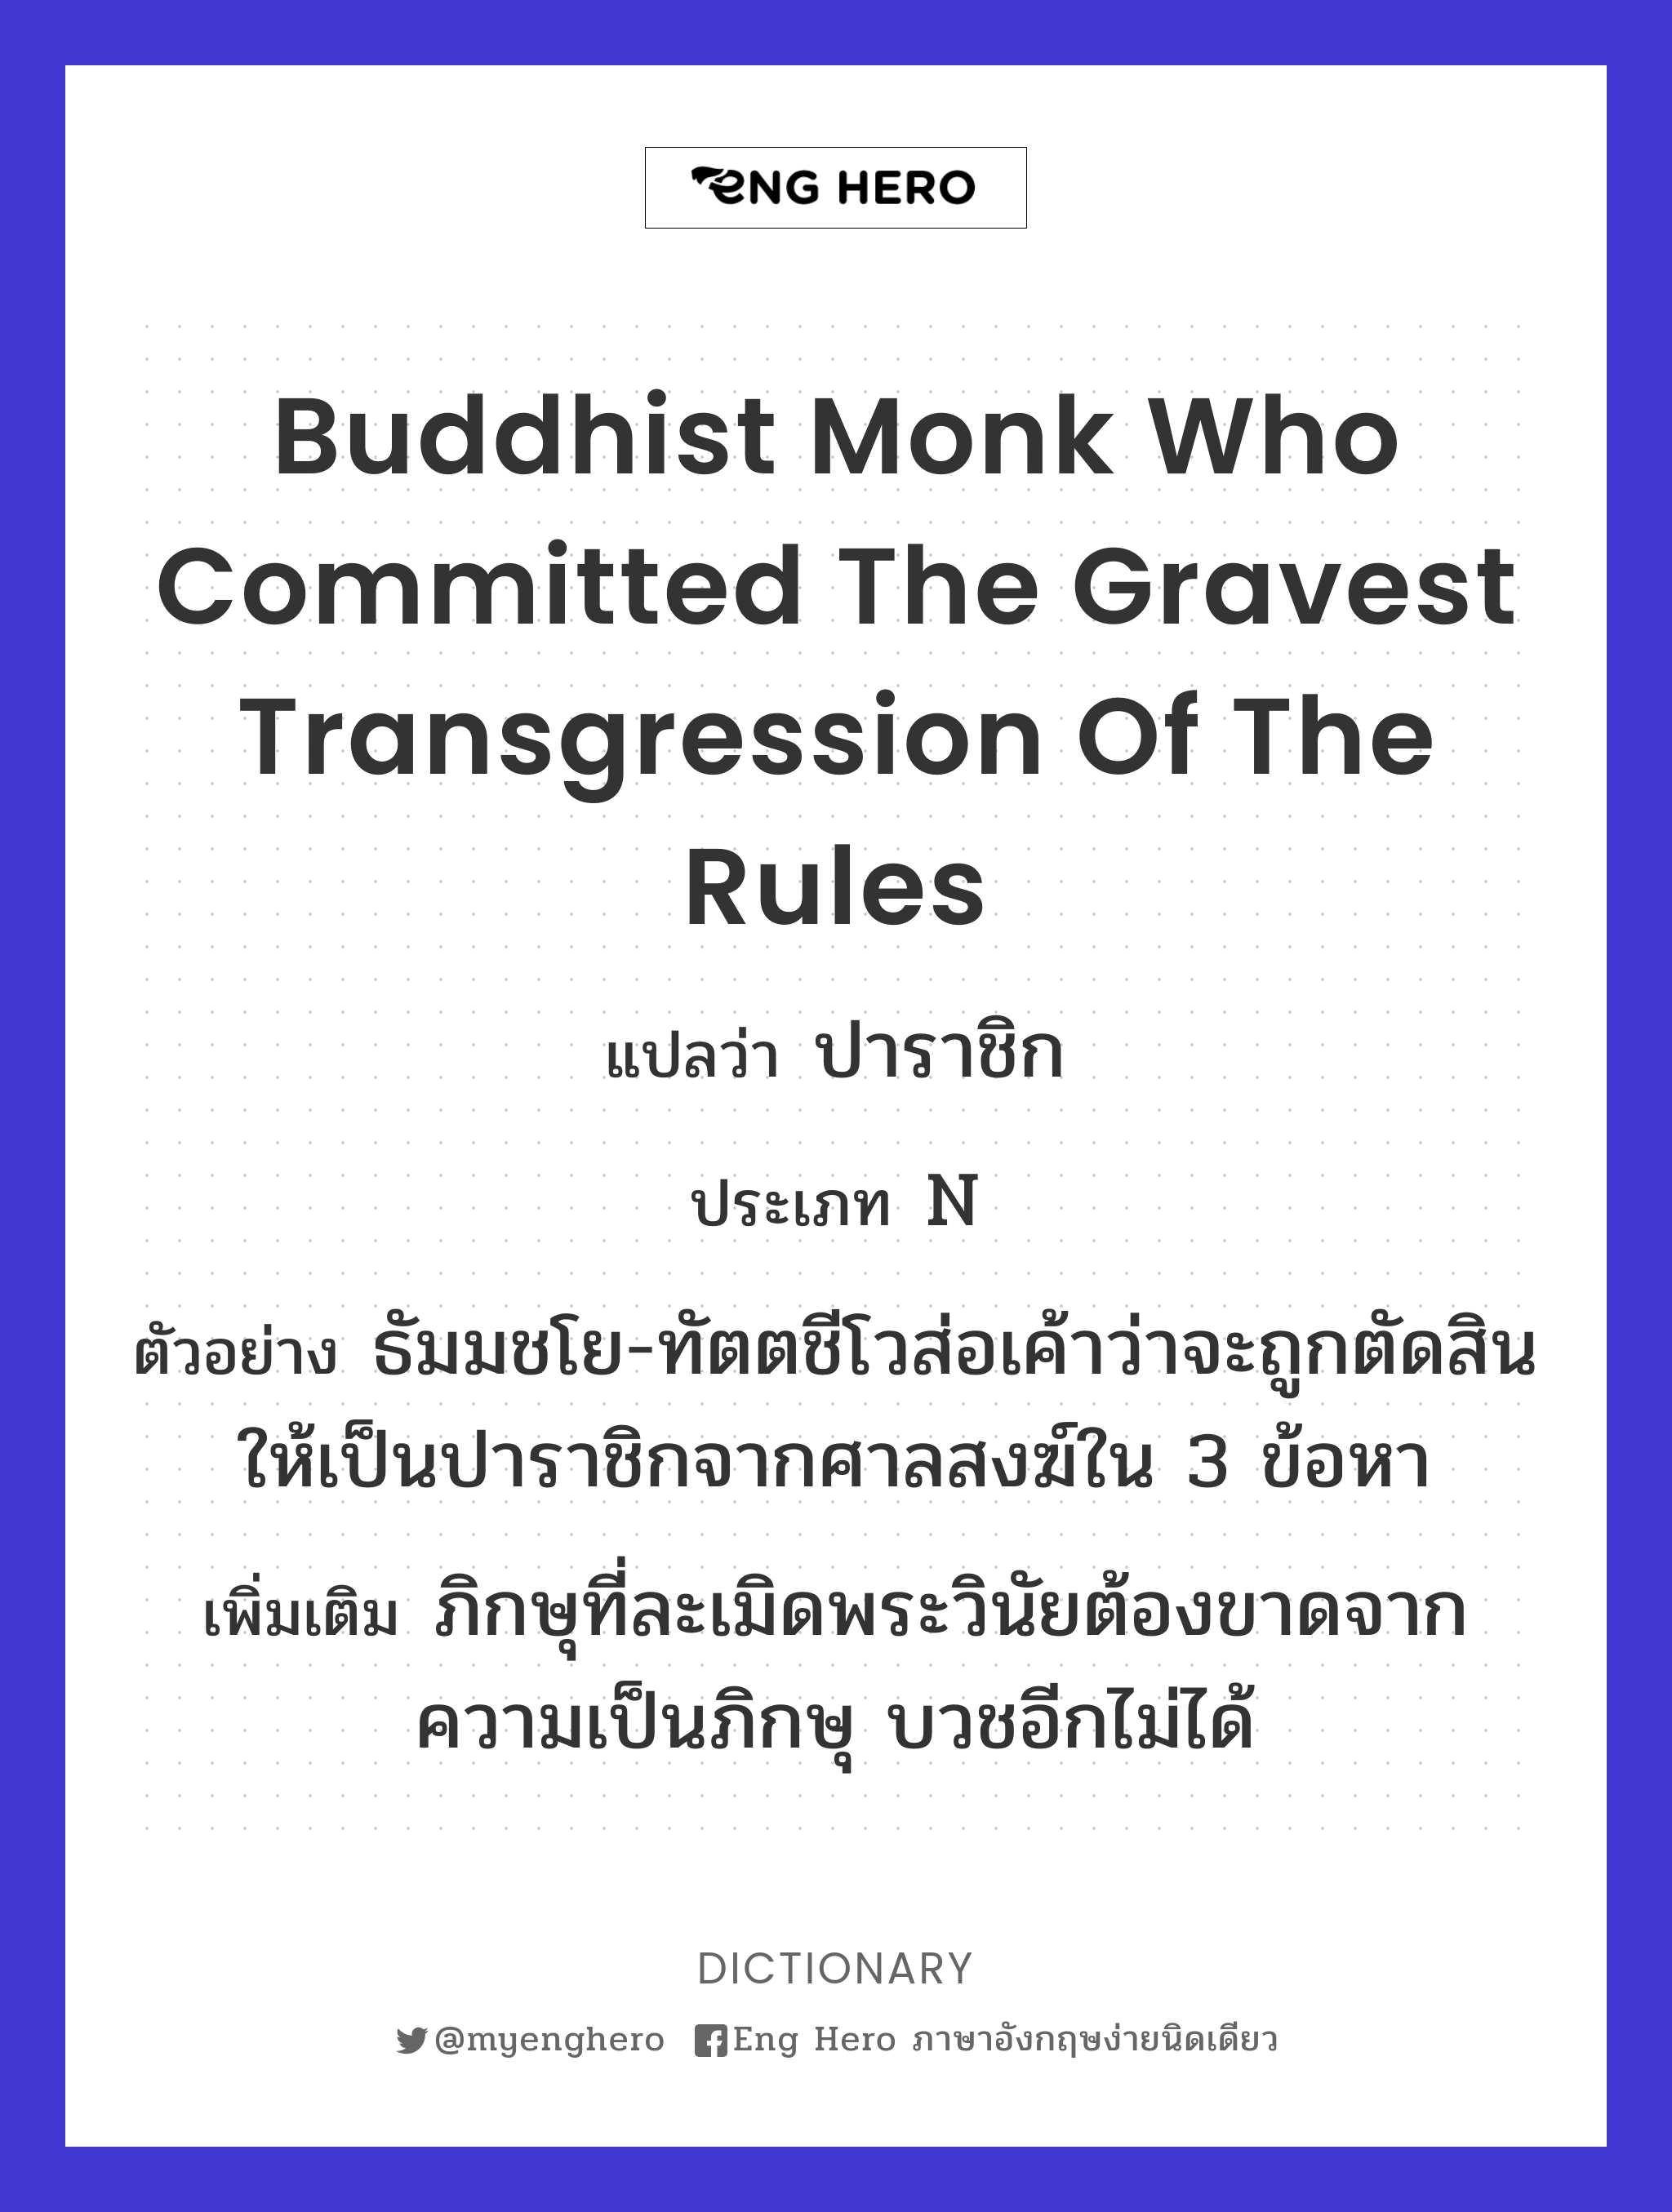 Buddhist monk who committed the gravest transgression of the rules